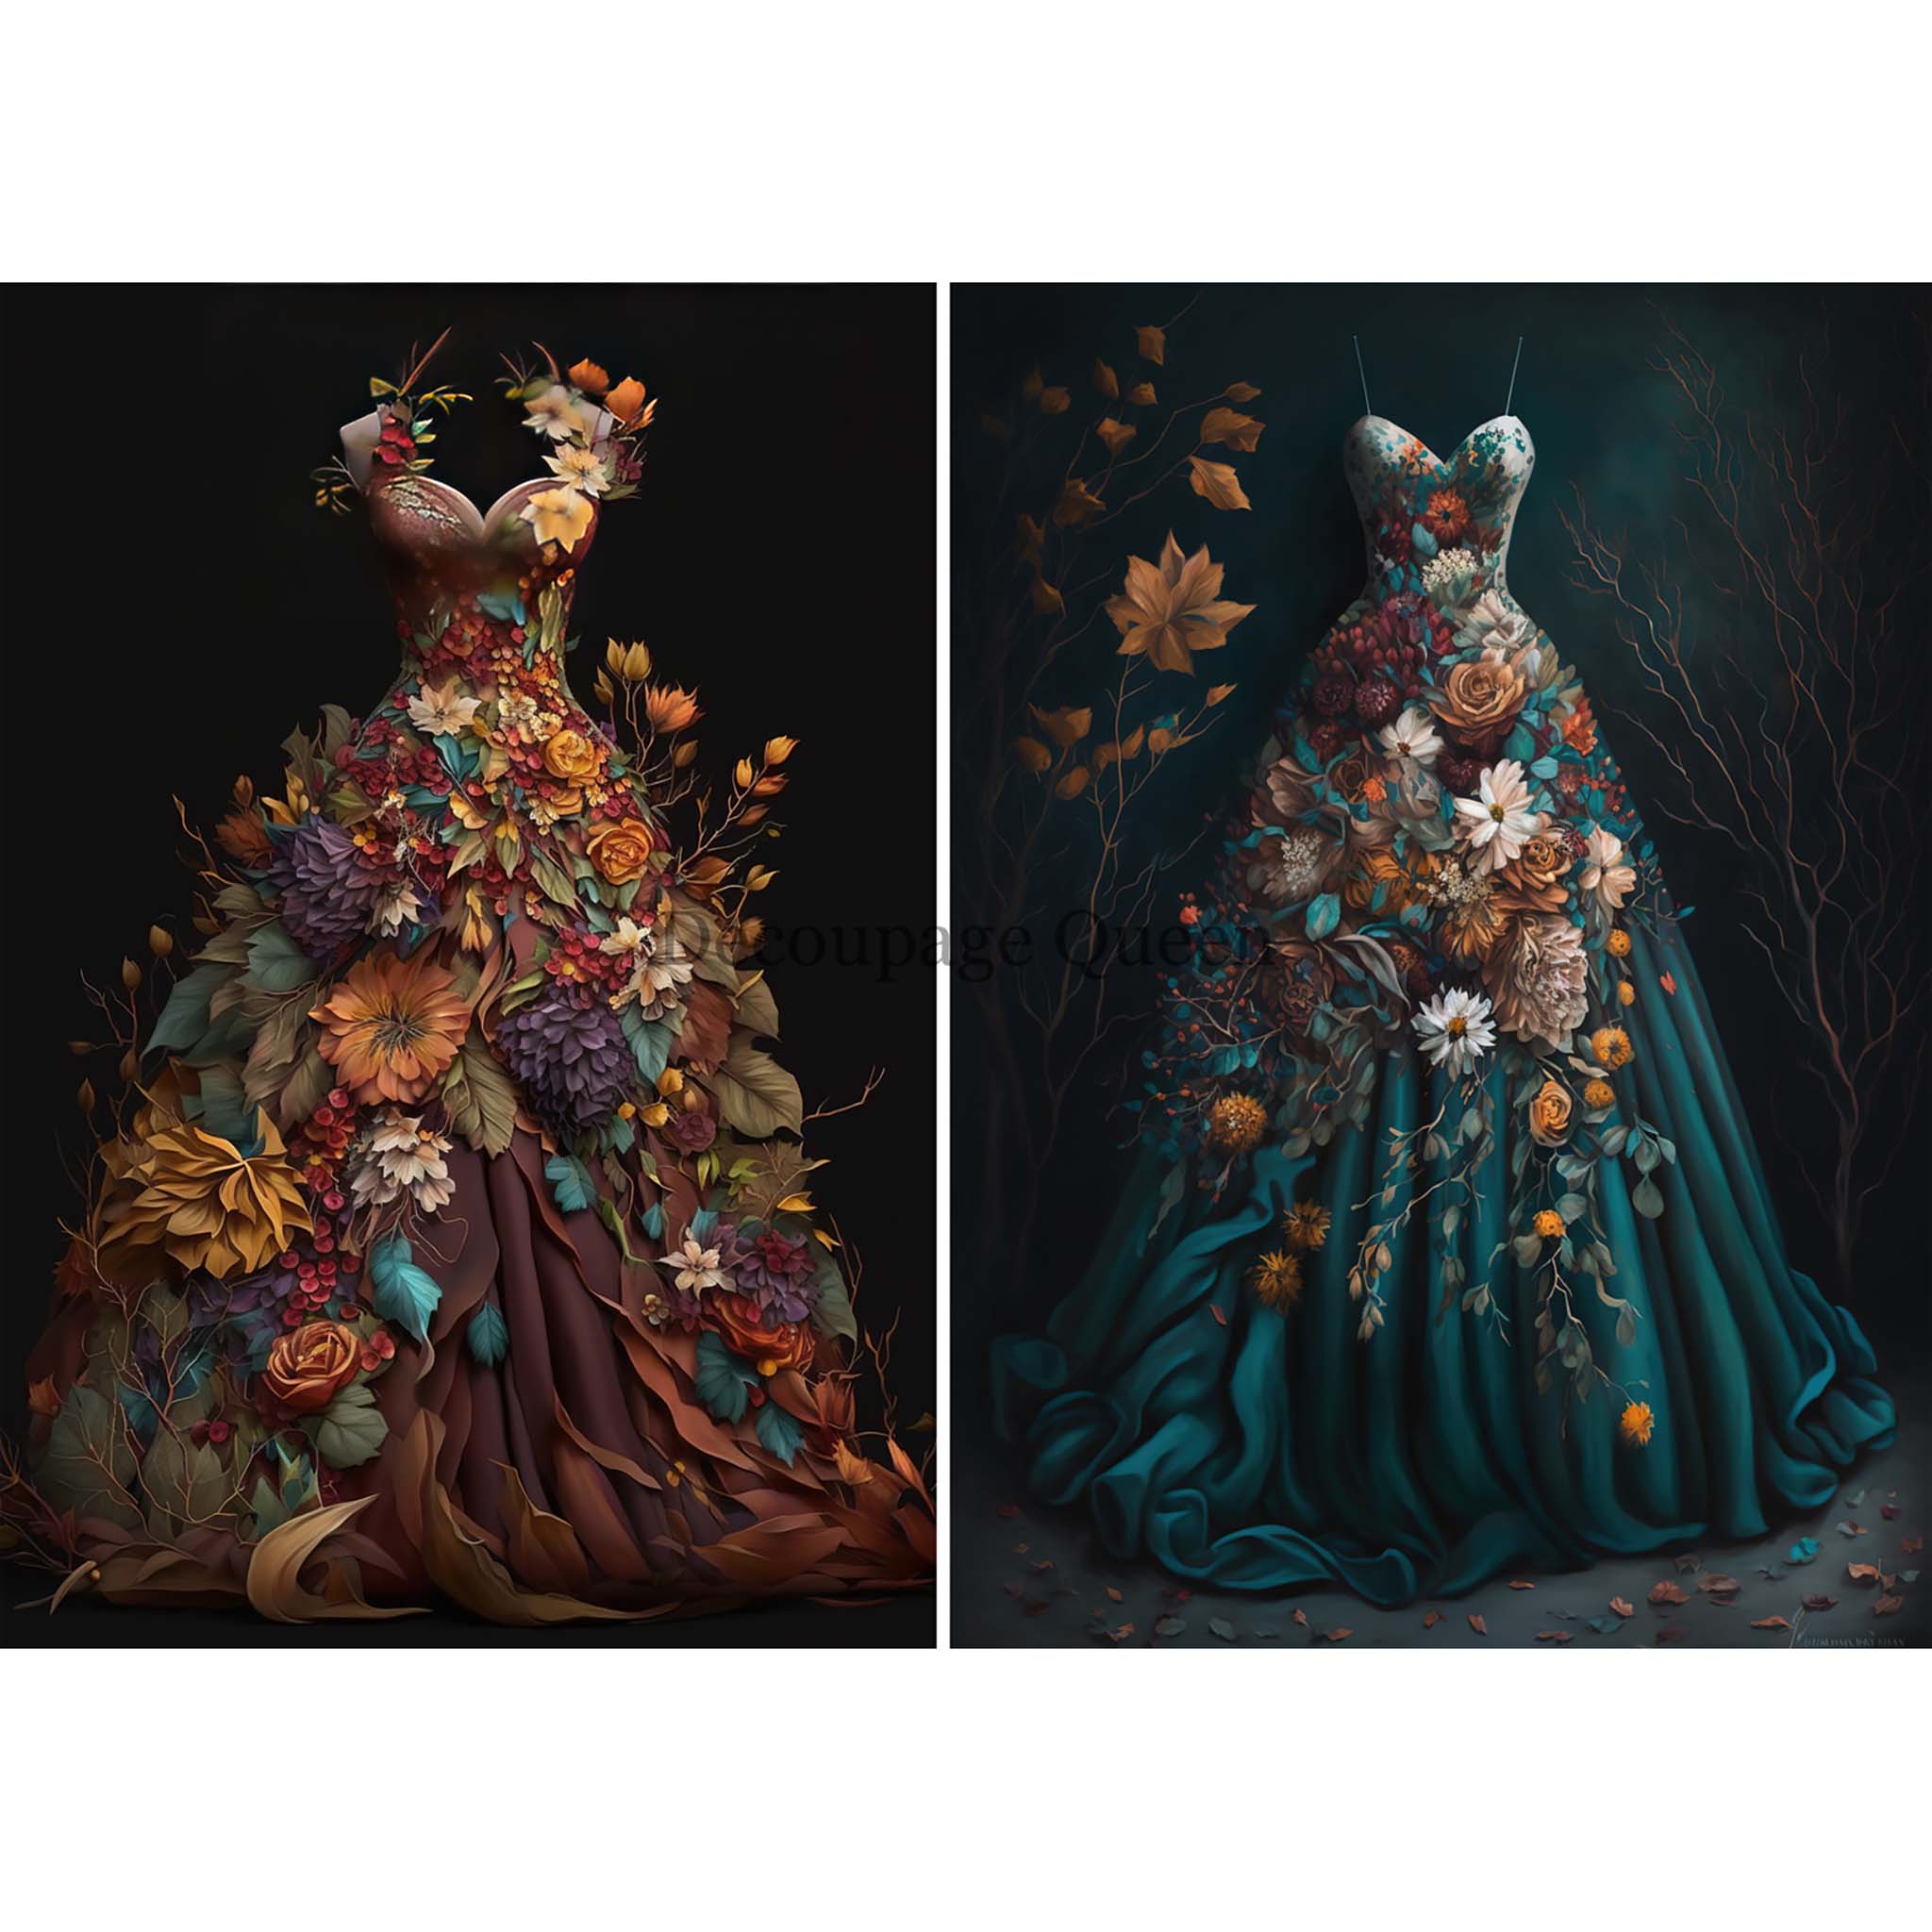 A2 rice paper design that features 2 evening gowns. The gown on the left is maroon and orange and the gown on the right is dark teal. Both are covered in autumn flowers and foliage. White borders are on the top and bottom.